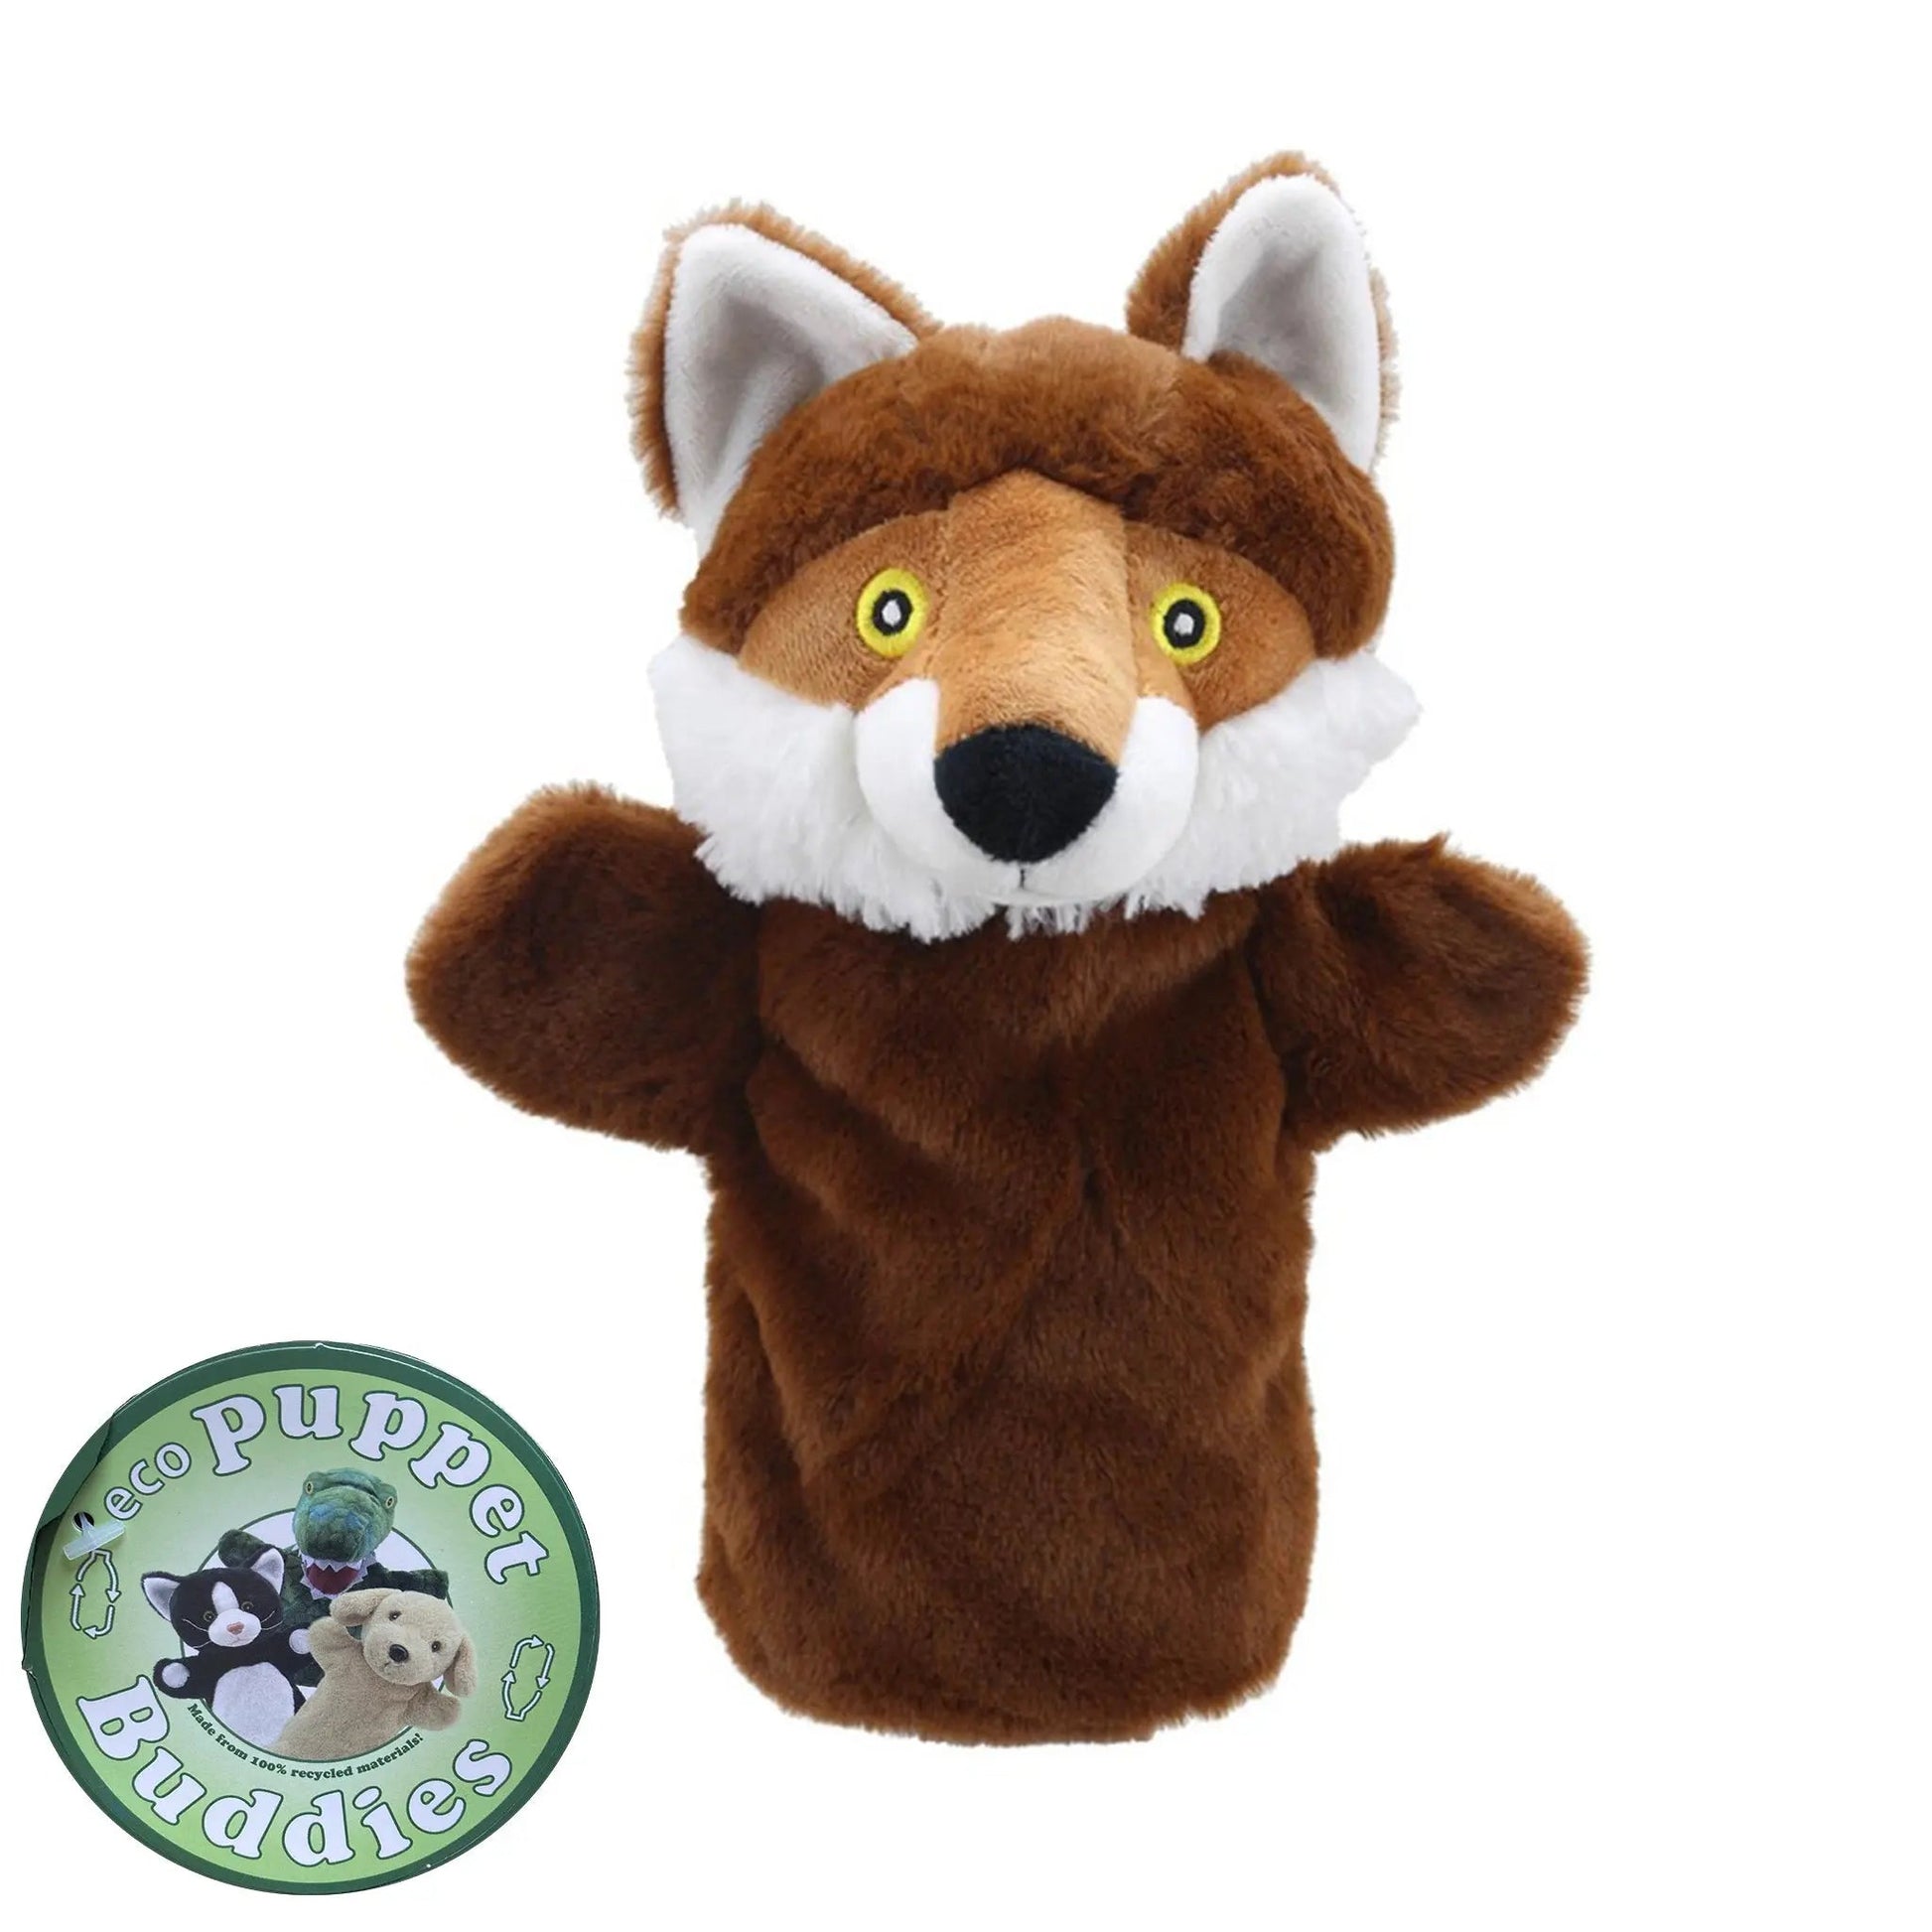 Fox Eco Puppet Buddies Hand Puppet - The Puppet Company - The Forgotten Toy Shop